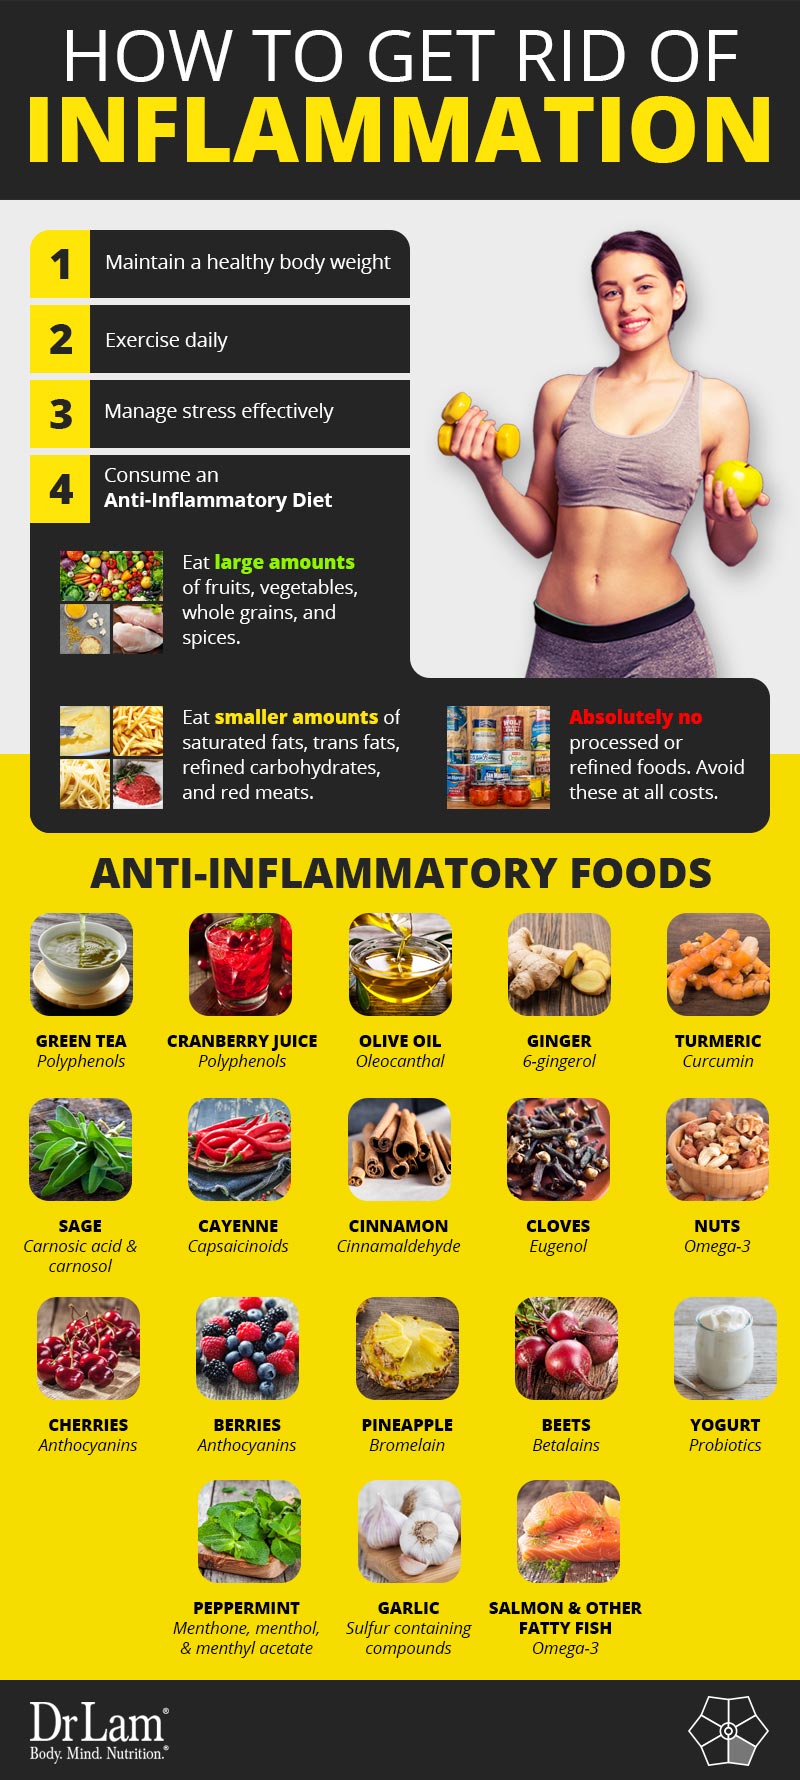 Check out this easy to understand infographic on how to get rid of inflammation in the body